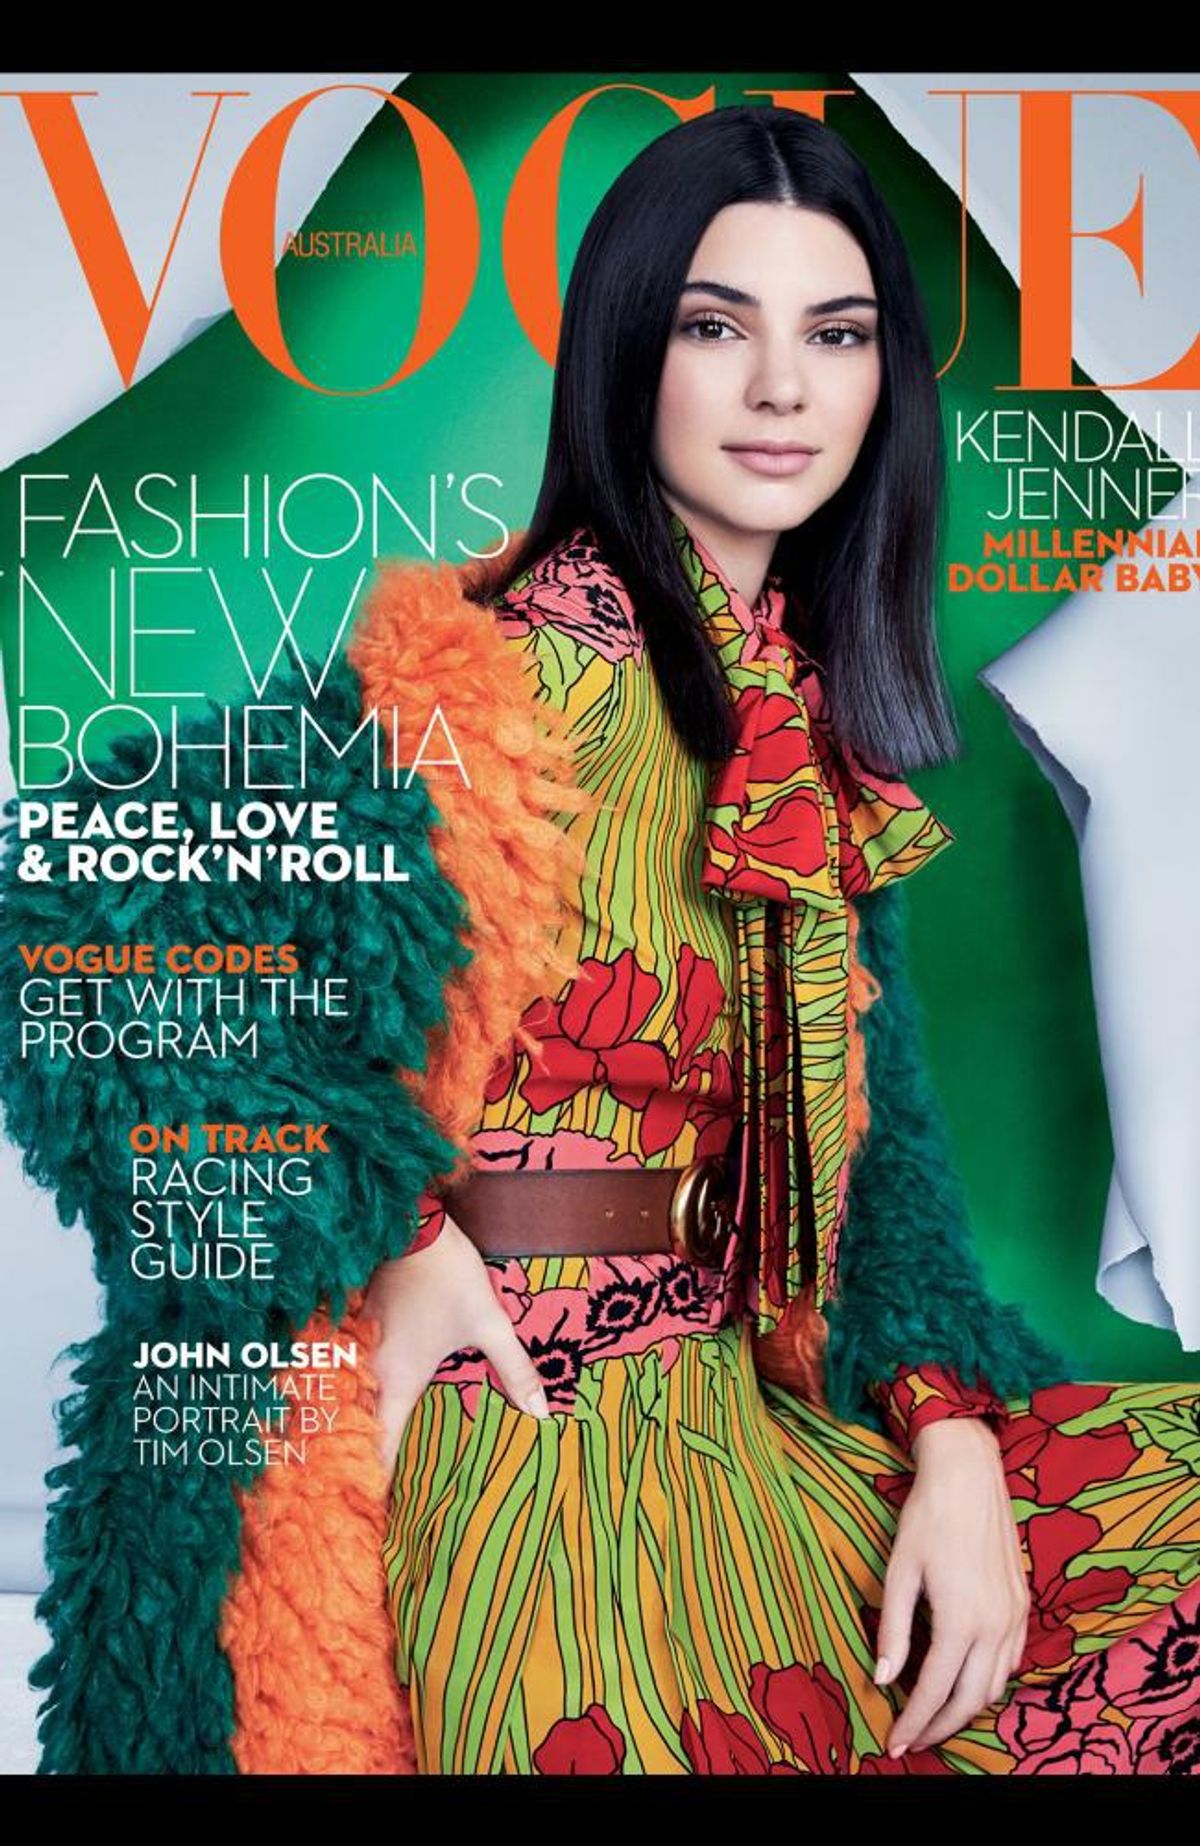 Kendall Jenner Proves Once Again We Are All Inferior With Her Ninth Vogue Cover